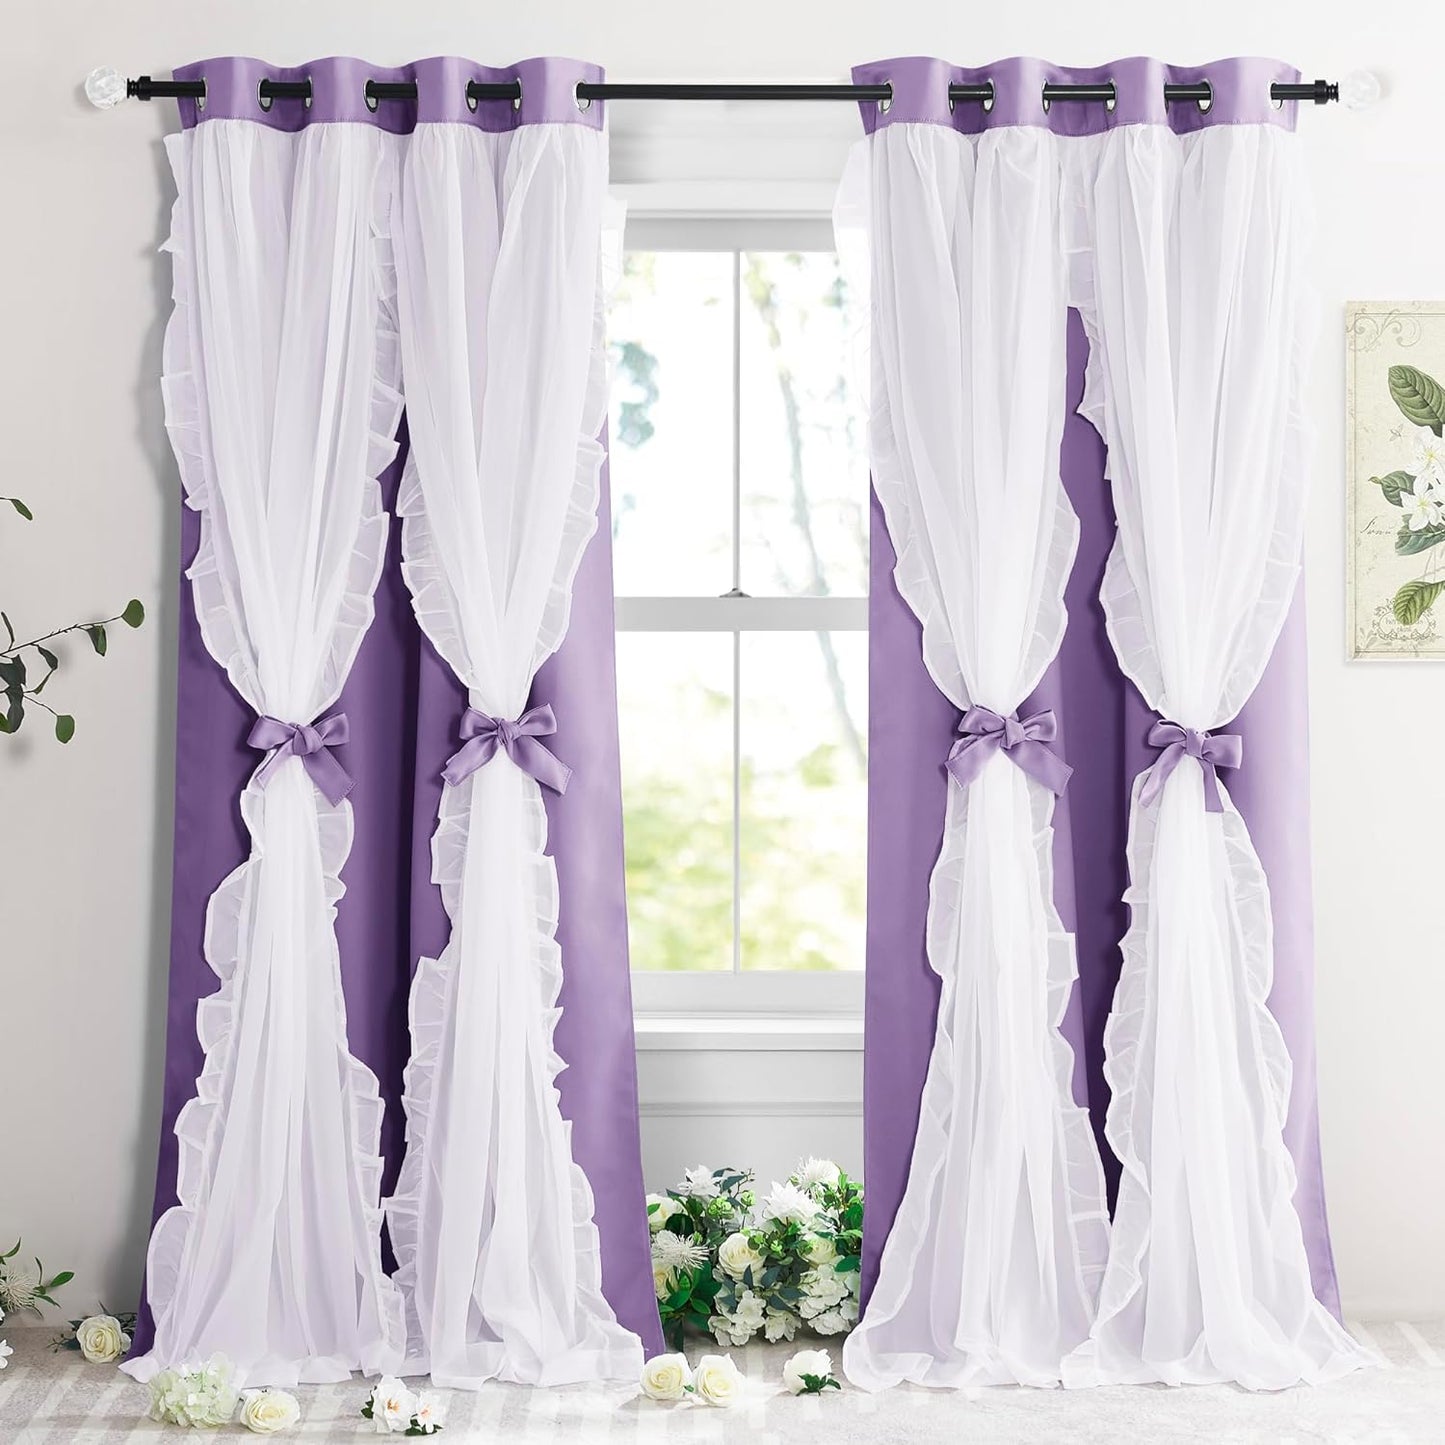 PONY DANCE Blackout Curtains for Living Room Decor Window Treatment Double Layer Drapes Ruffle Sheer Overlay Farmhouse Rustic Design, W 52 X L 84 Inches, Sage Green, 2 Panels  PONY DANCE Lilac 52" X 84" 